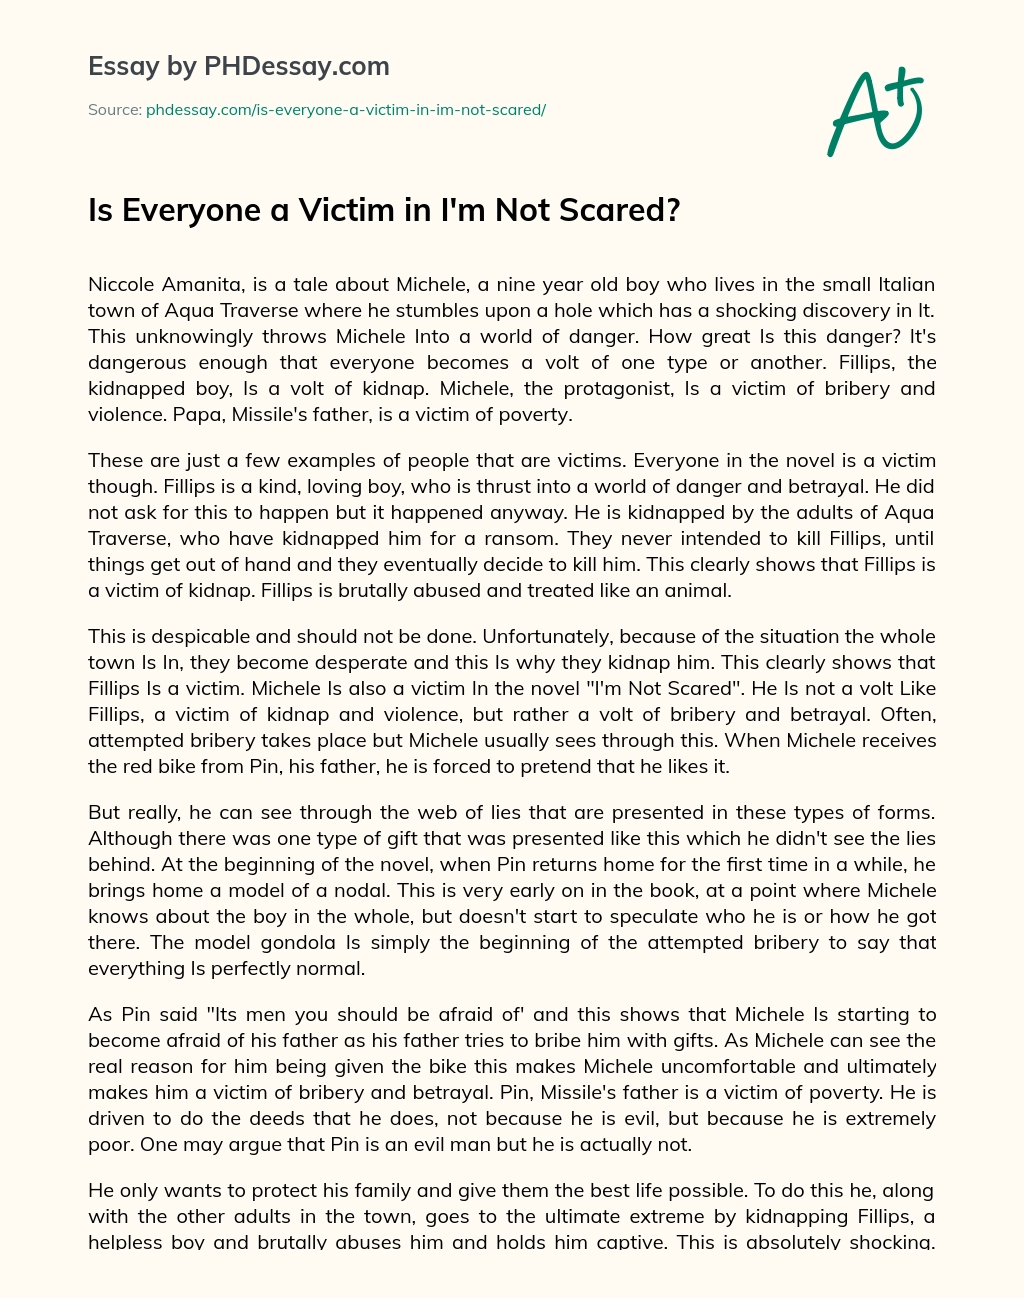 Is Everyone a Victim in I’m Not Scared? essay